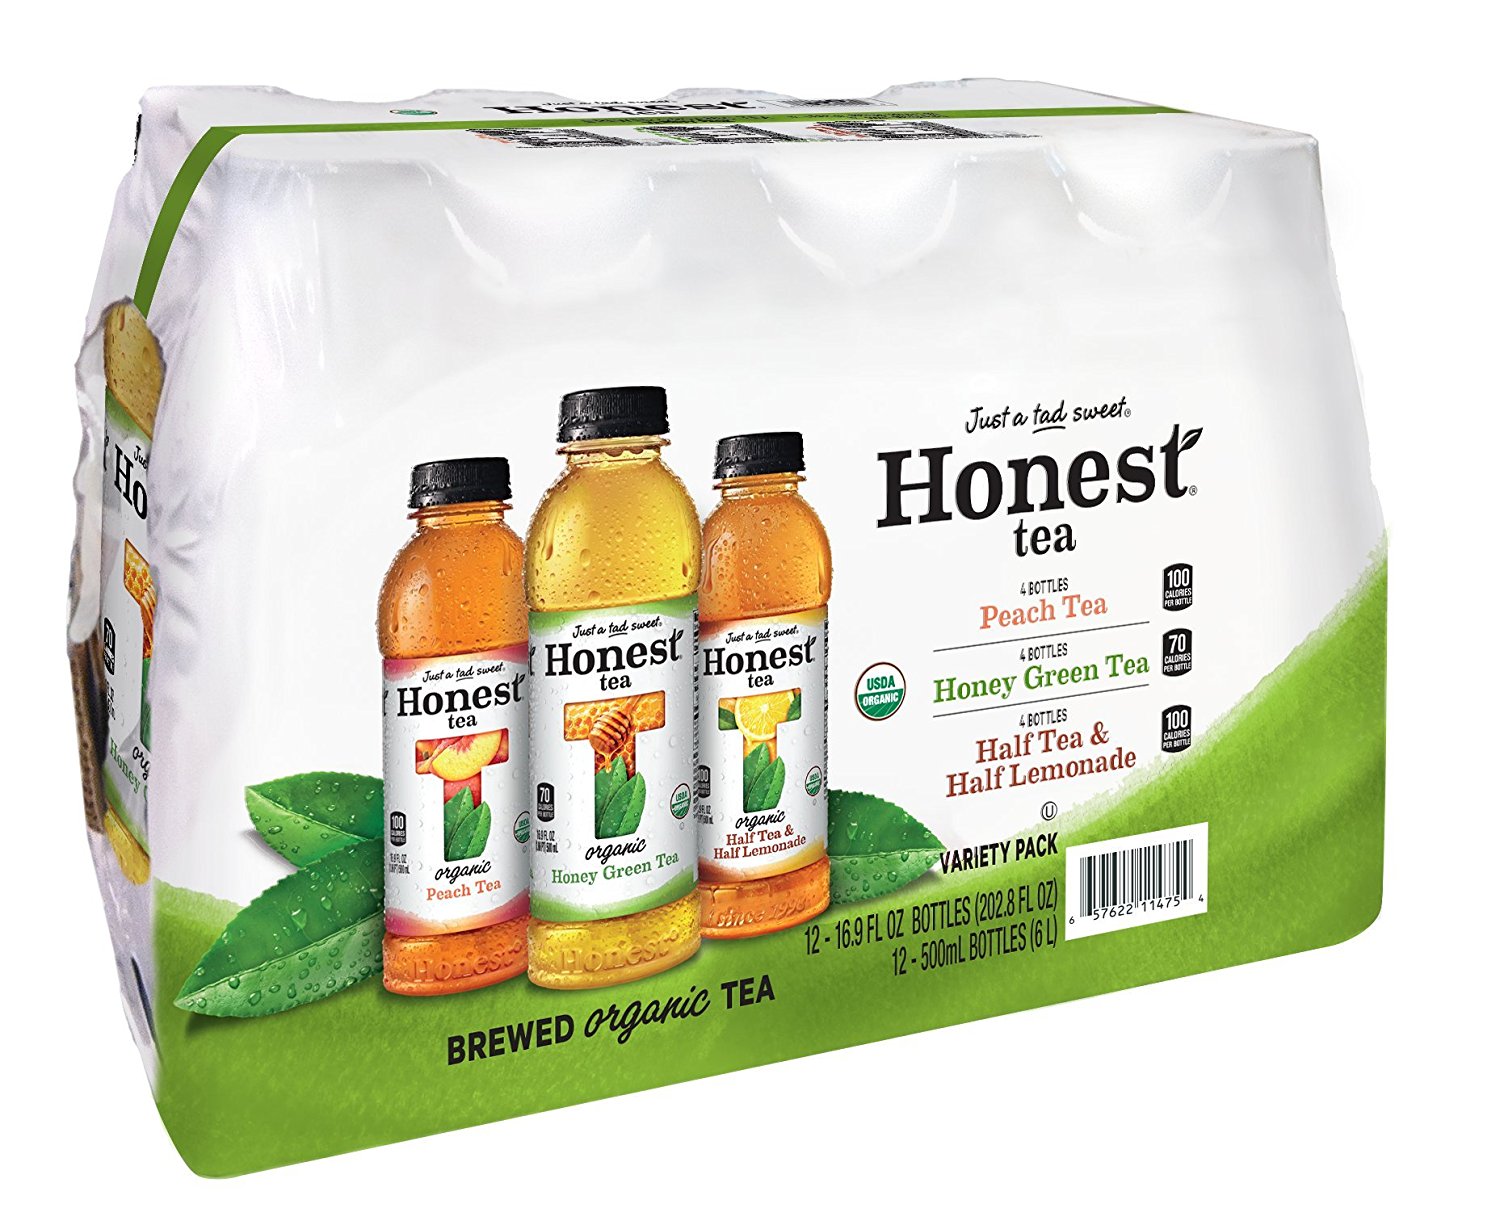 Amazon: Honest Tea Brewed Organic Tea Variety 12 Pack Only $7.77 Shipped!